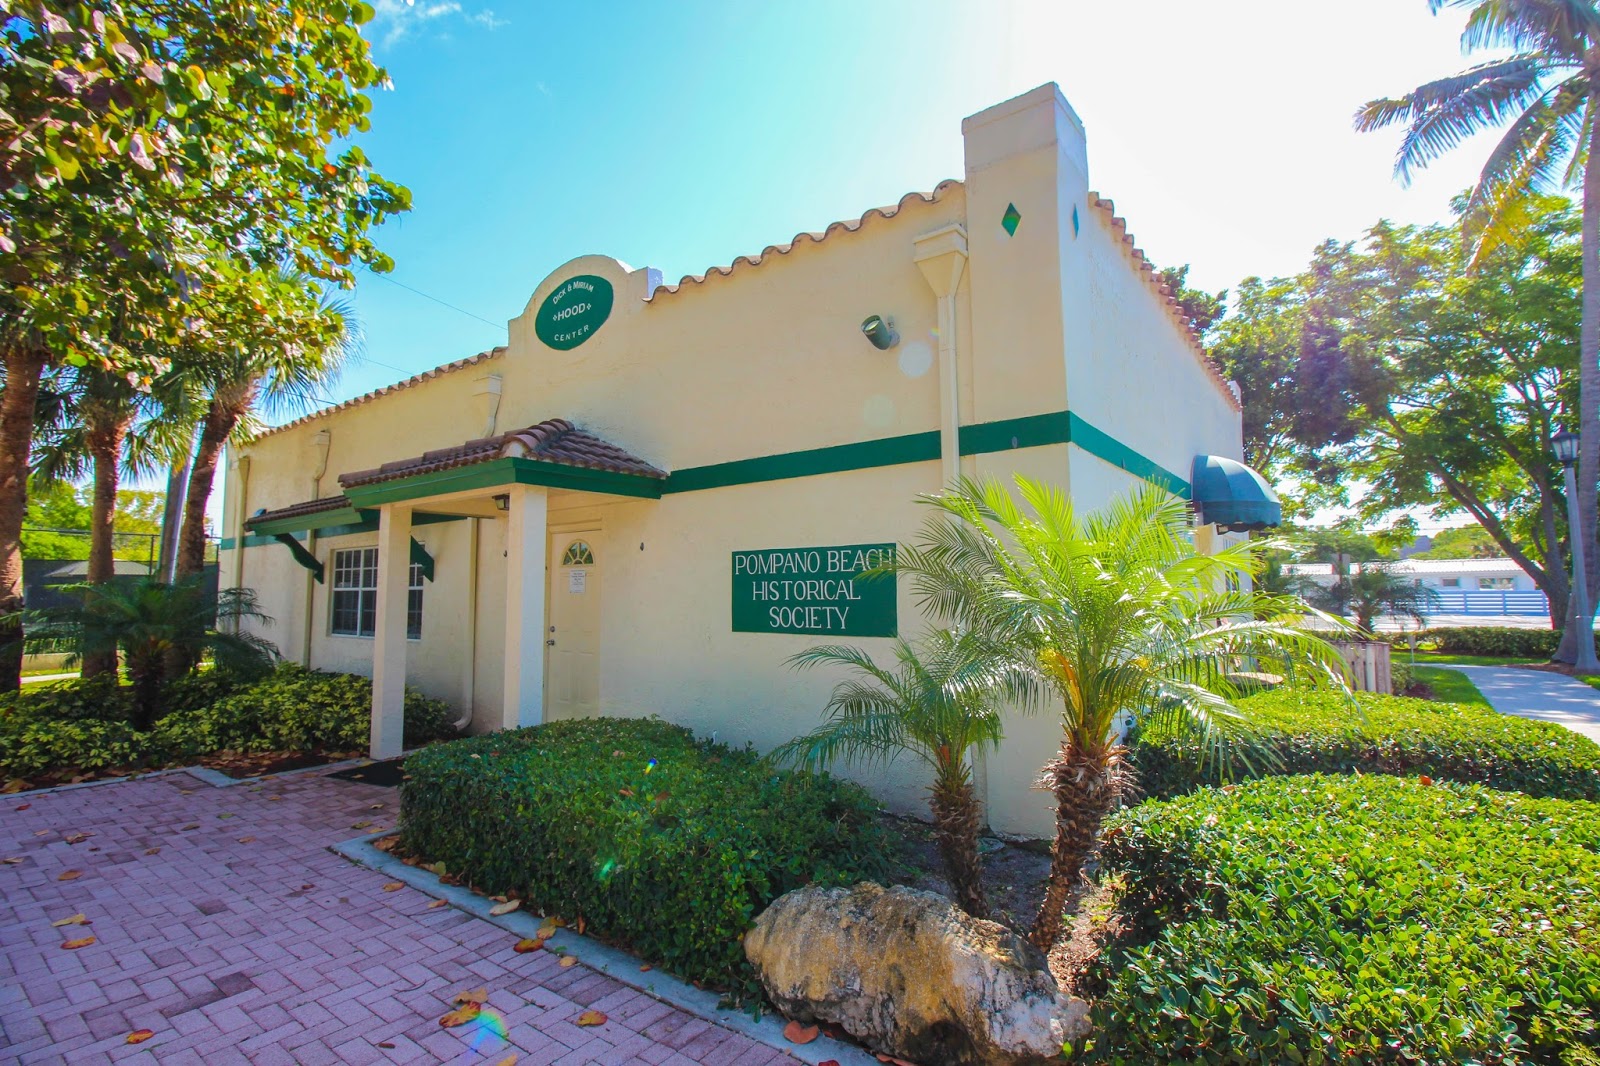 Pompano Beach Historical Society and Kester Museums